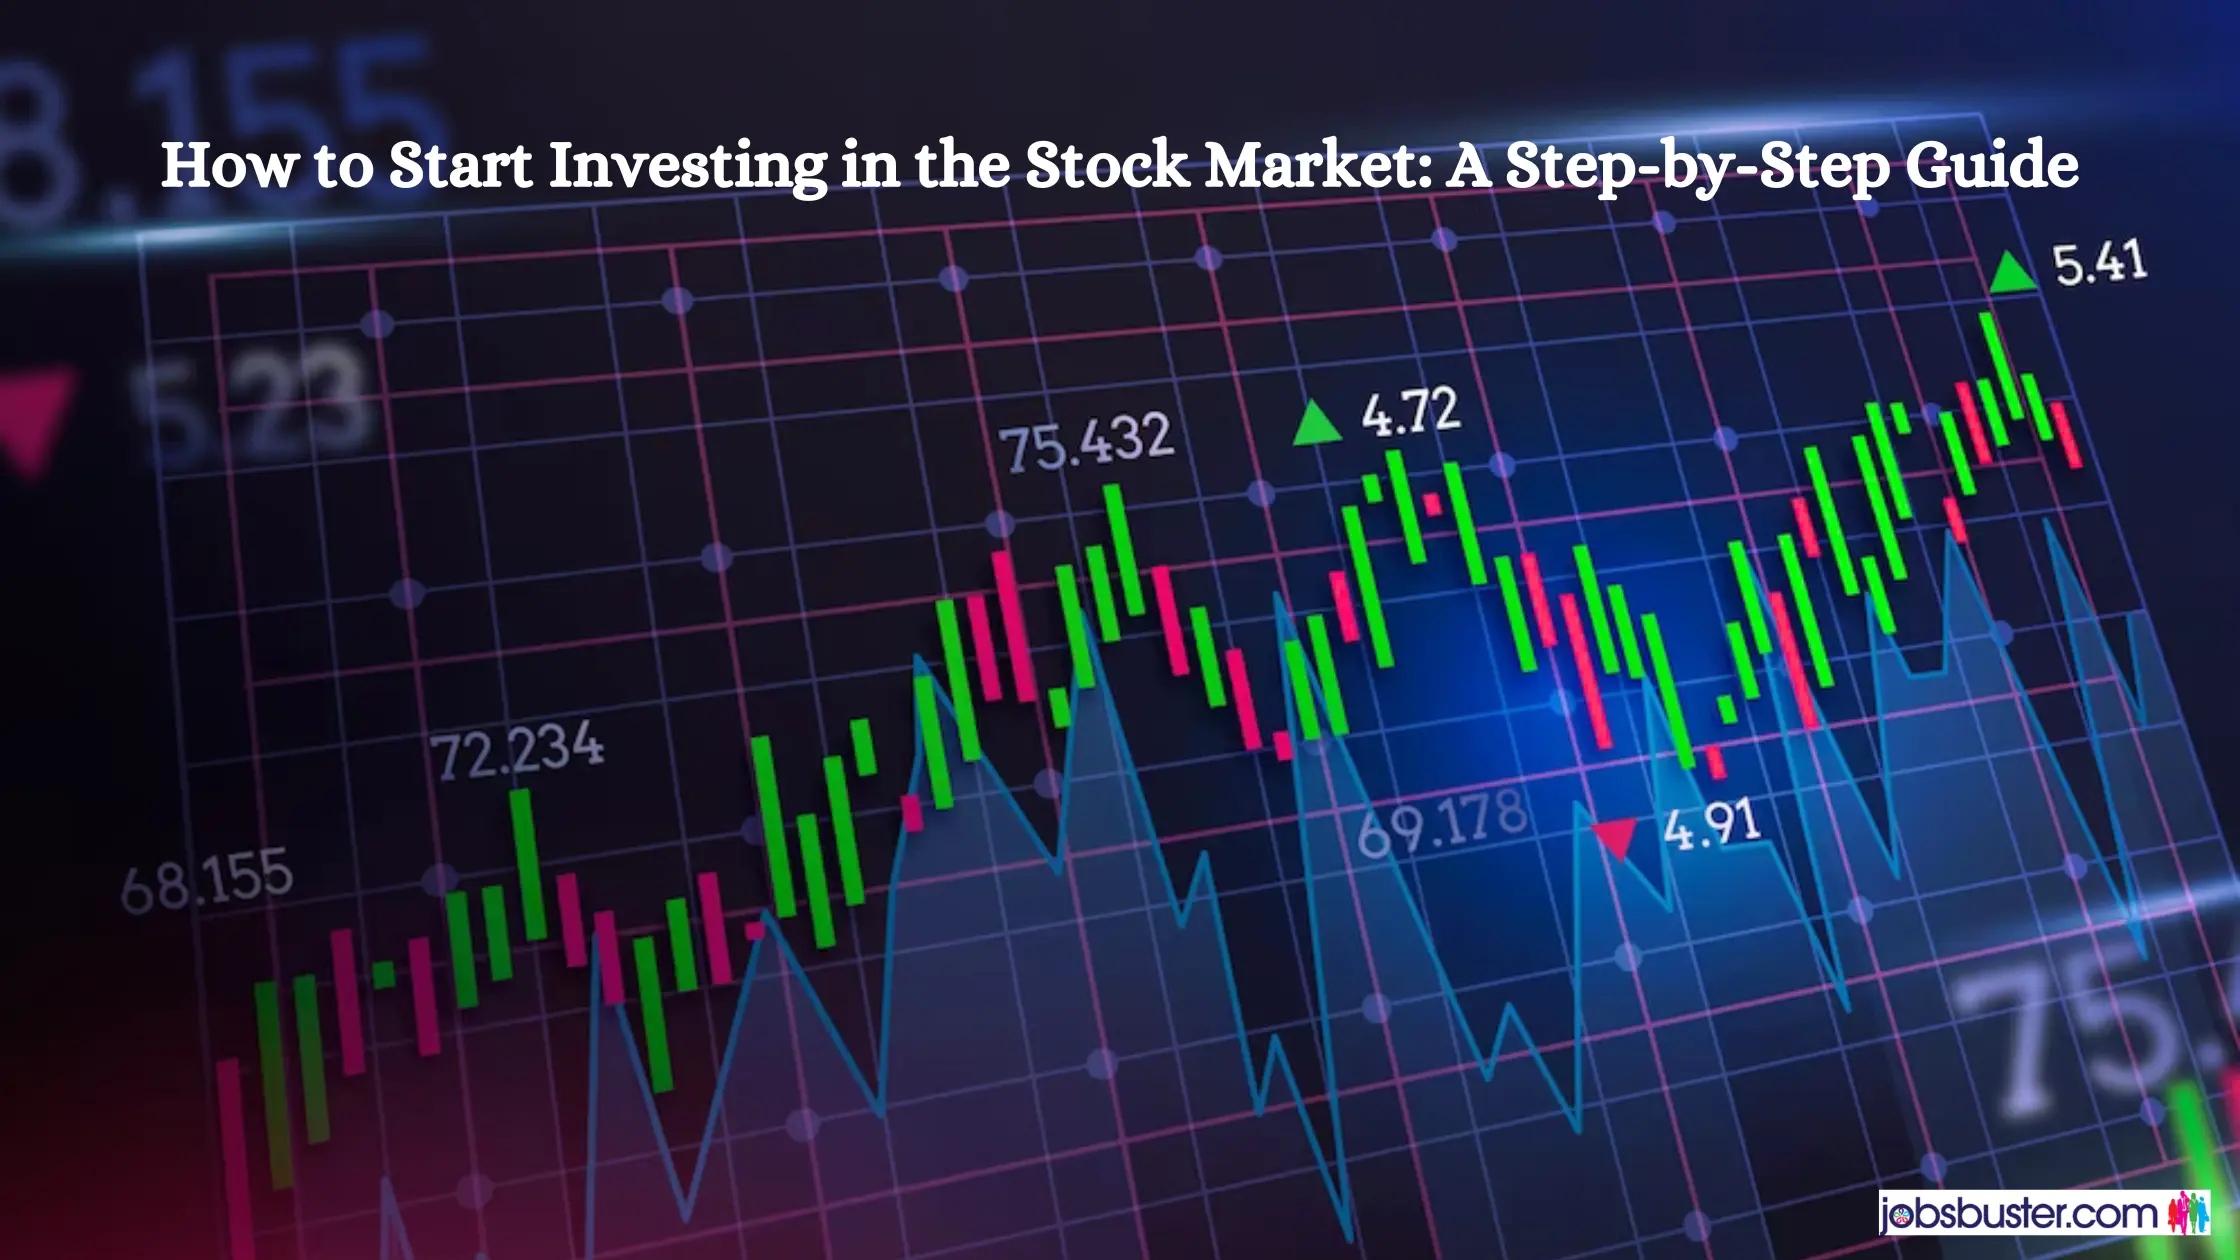 How to Start Investing in the Stock Market: A Step-by-Step Guide